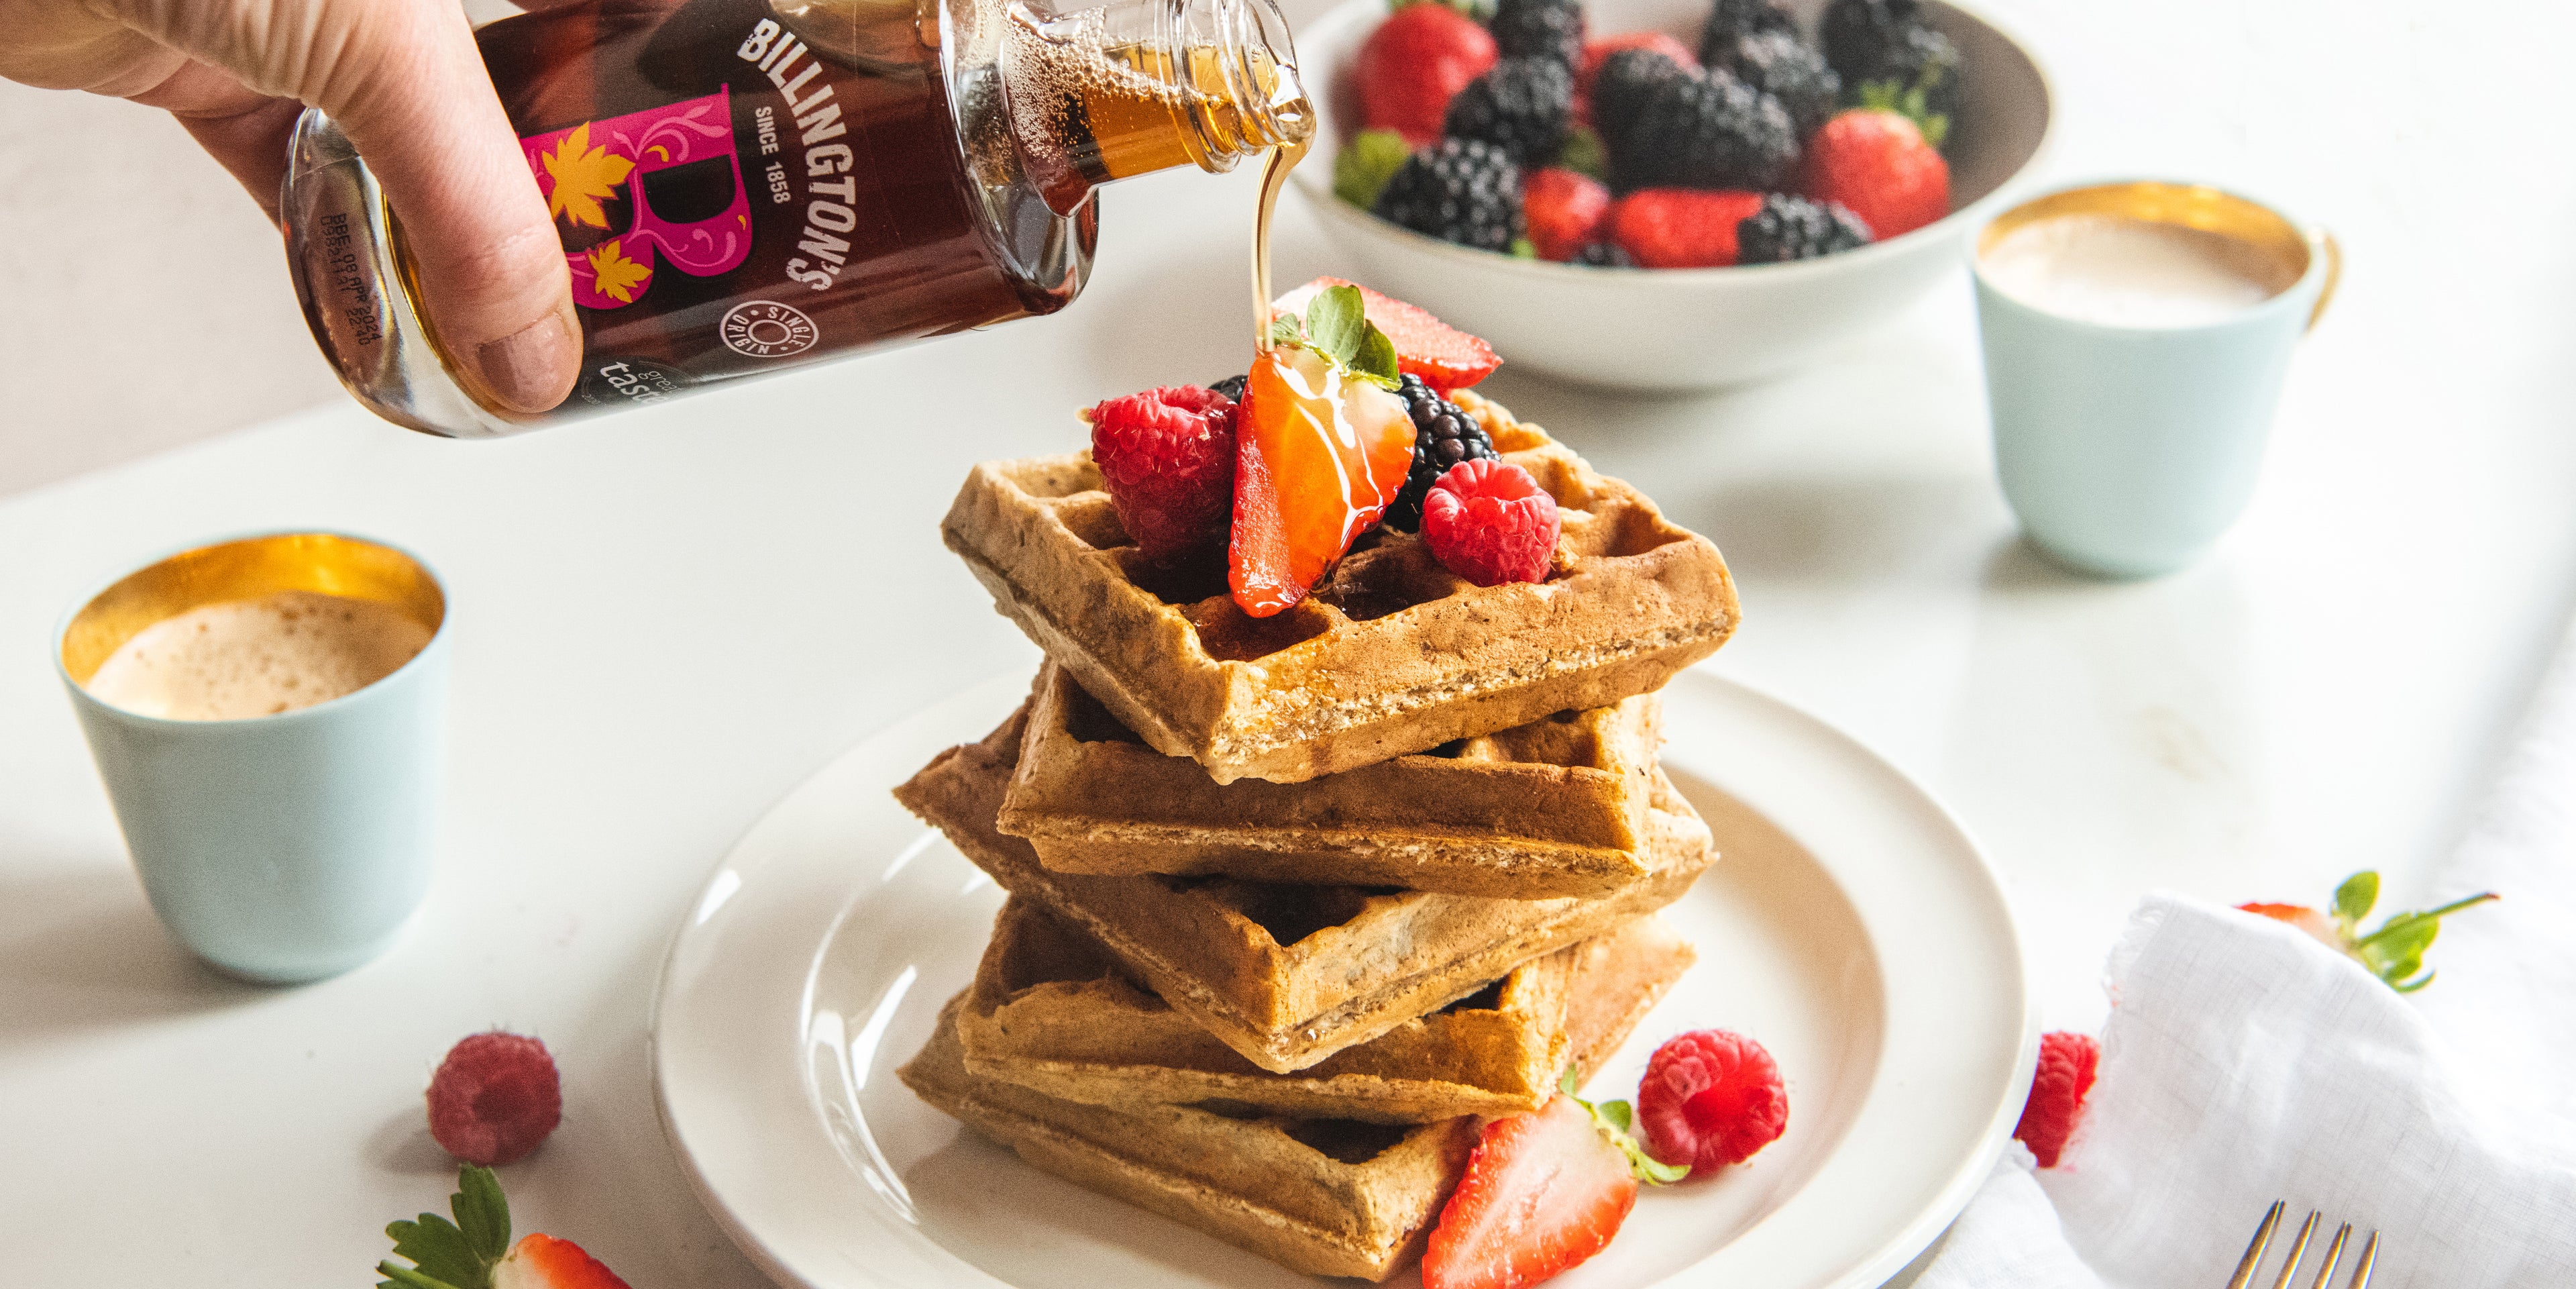 Wholemeal Banana Waffles being drizzled with Billington's maple syrup and topped with berries